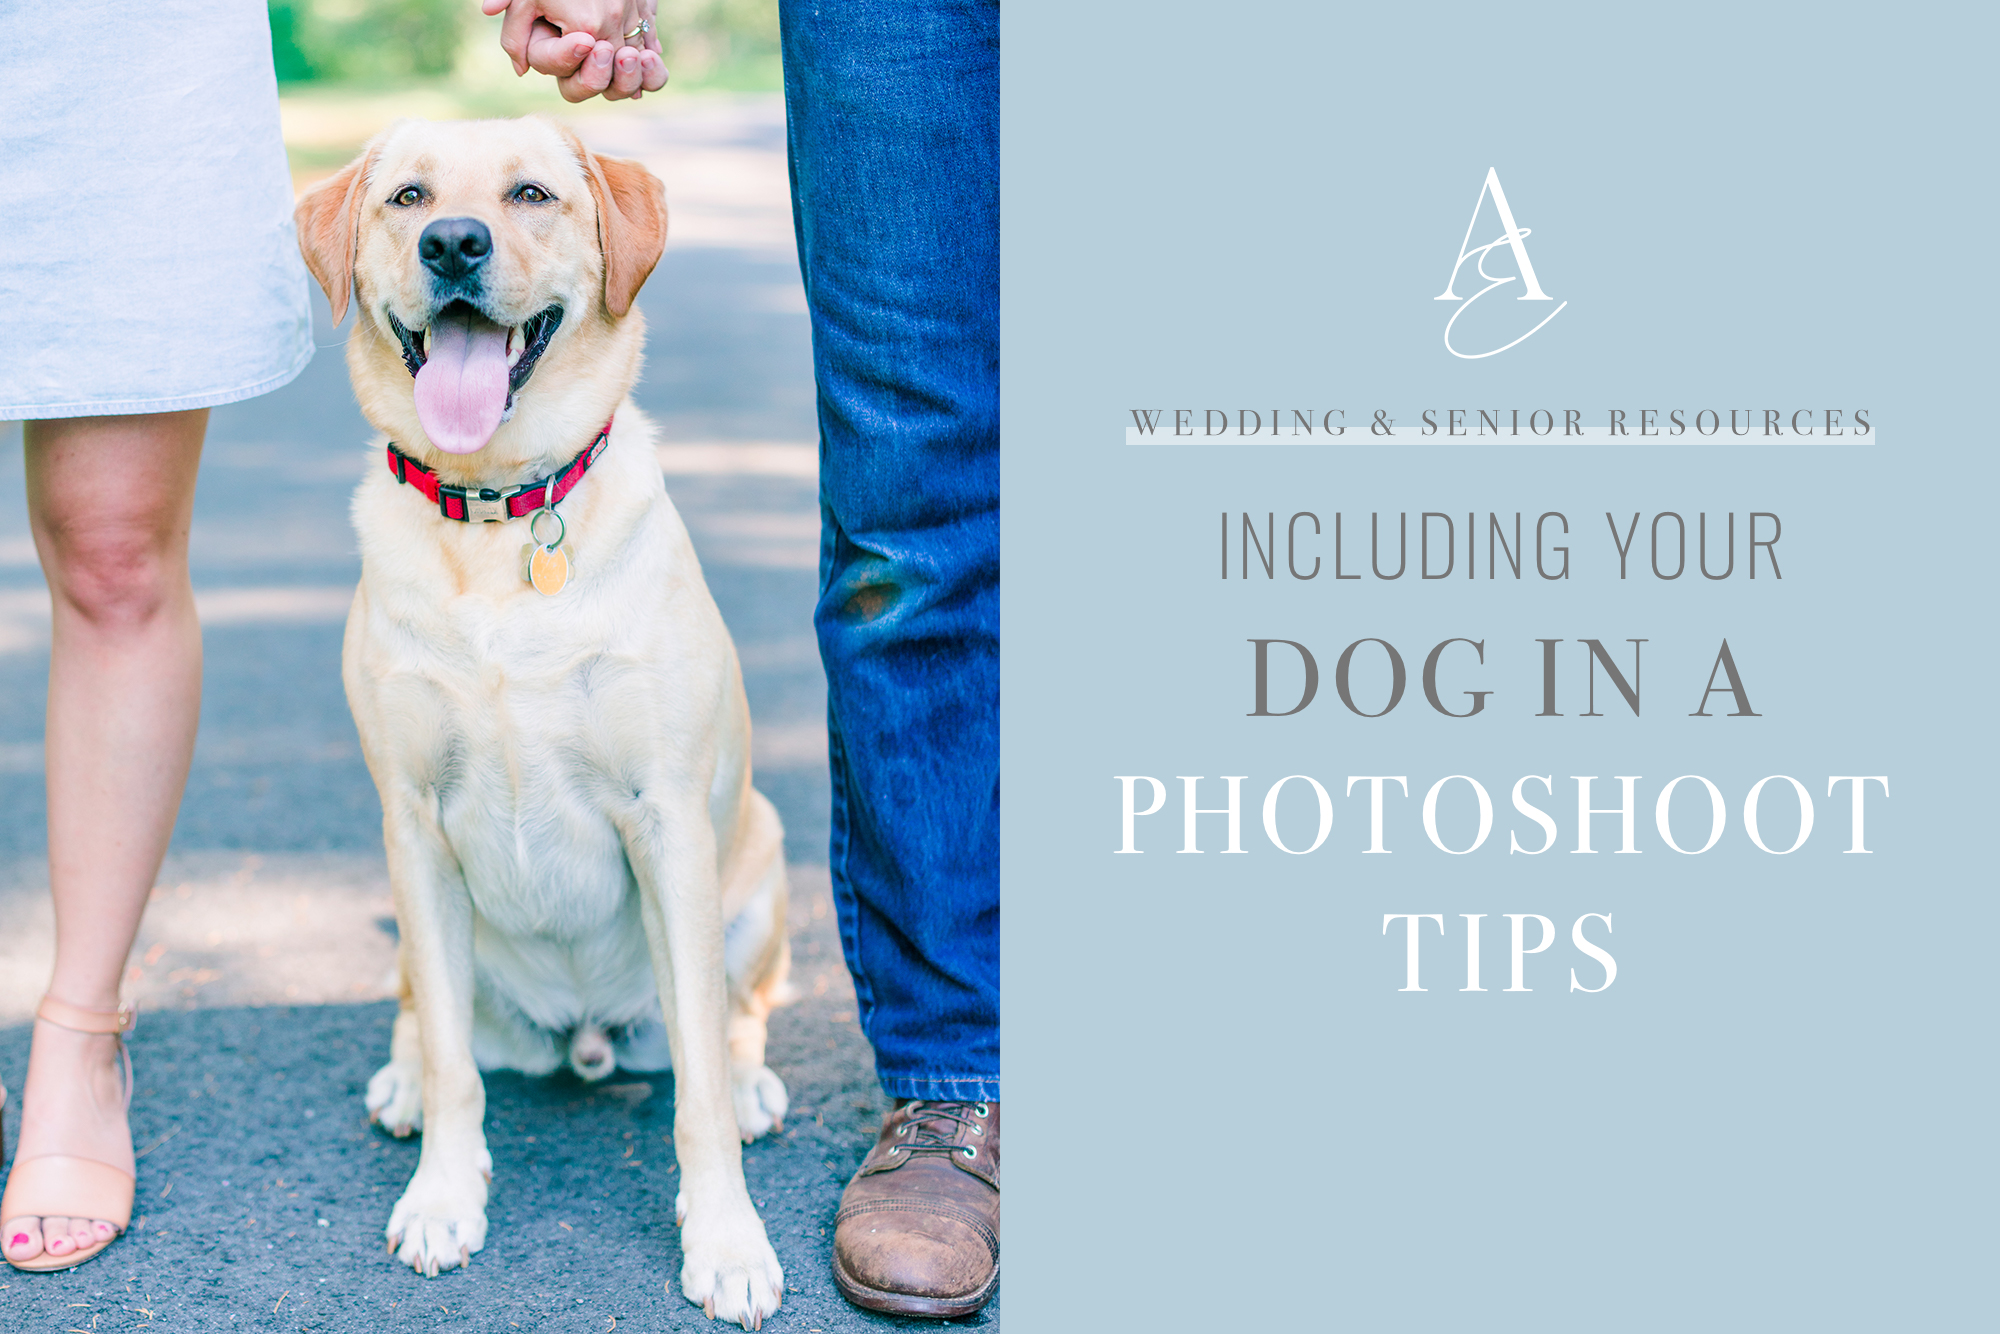 Graphic for dog photoshoot ideas